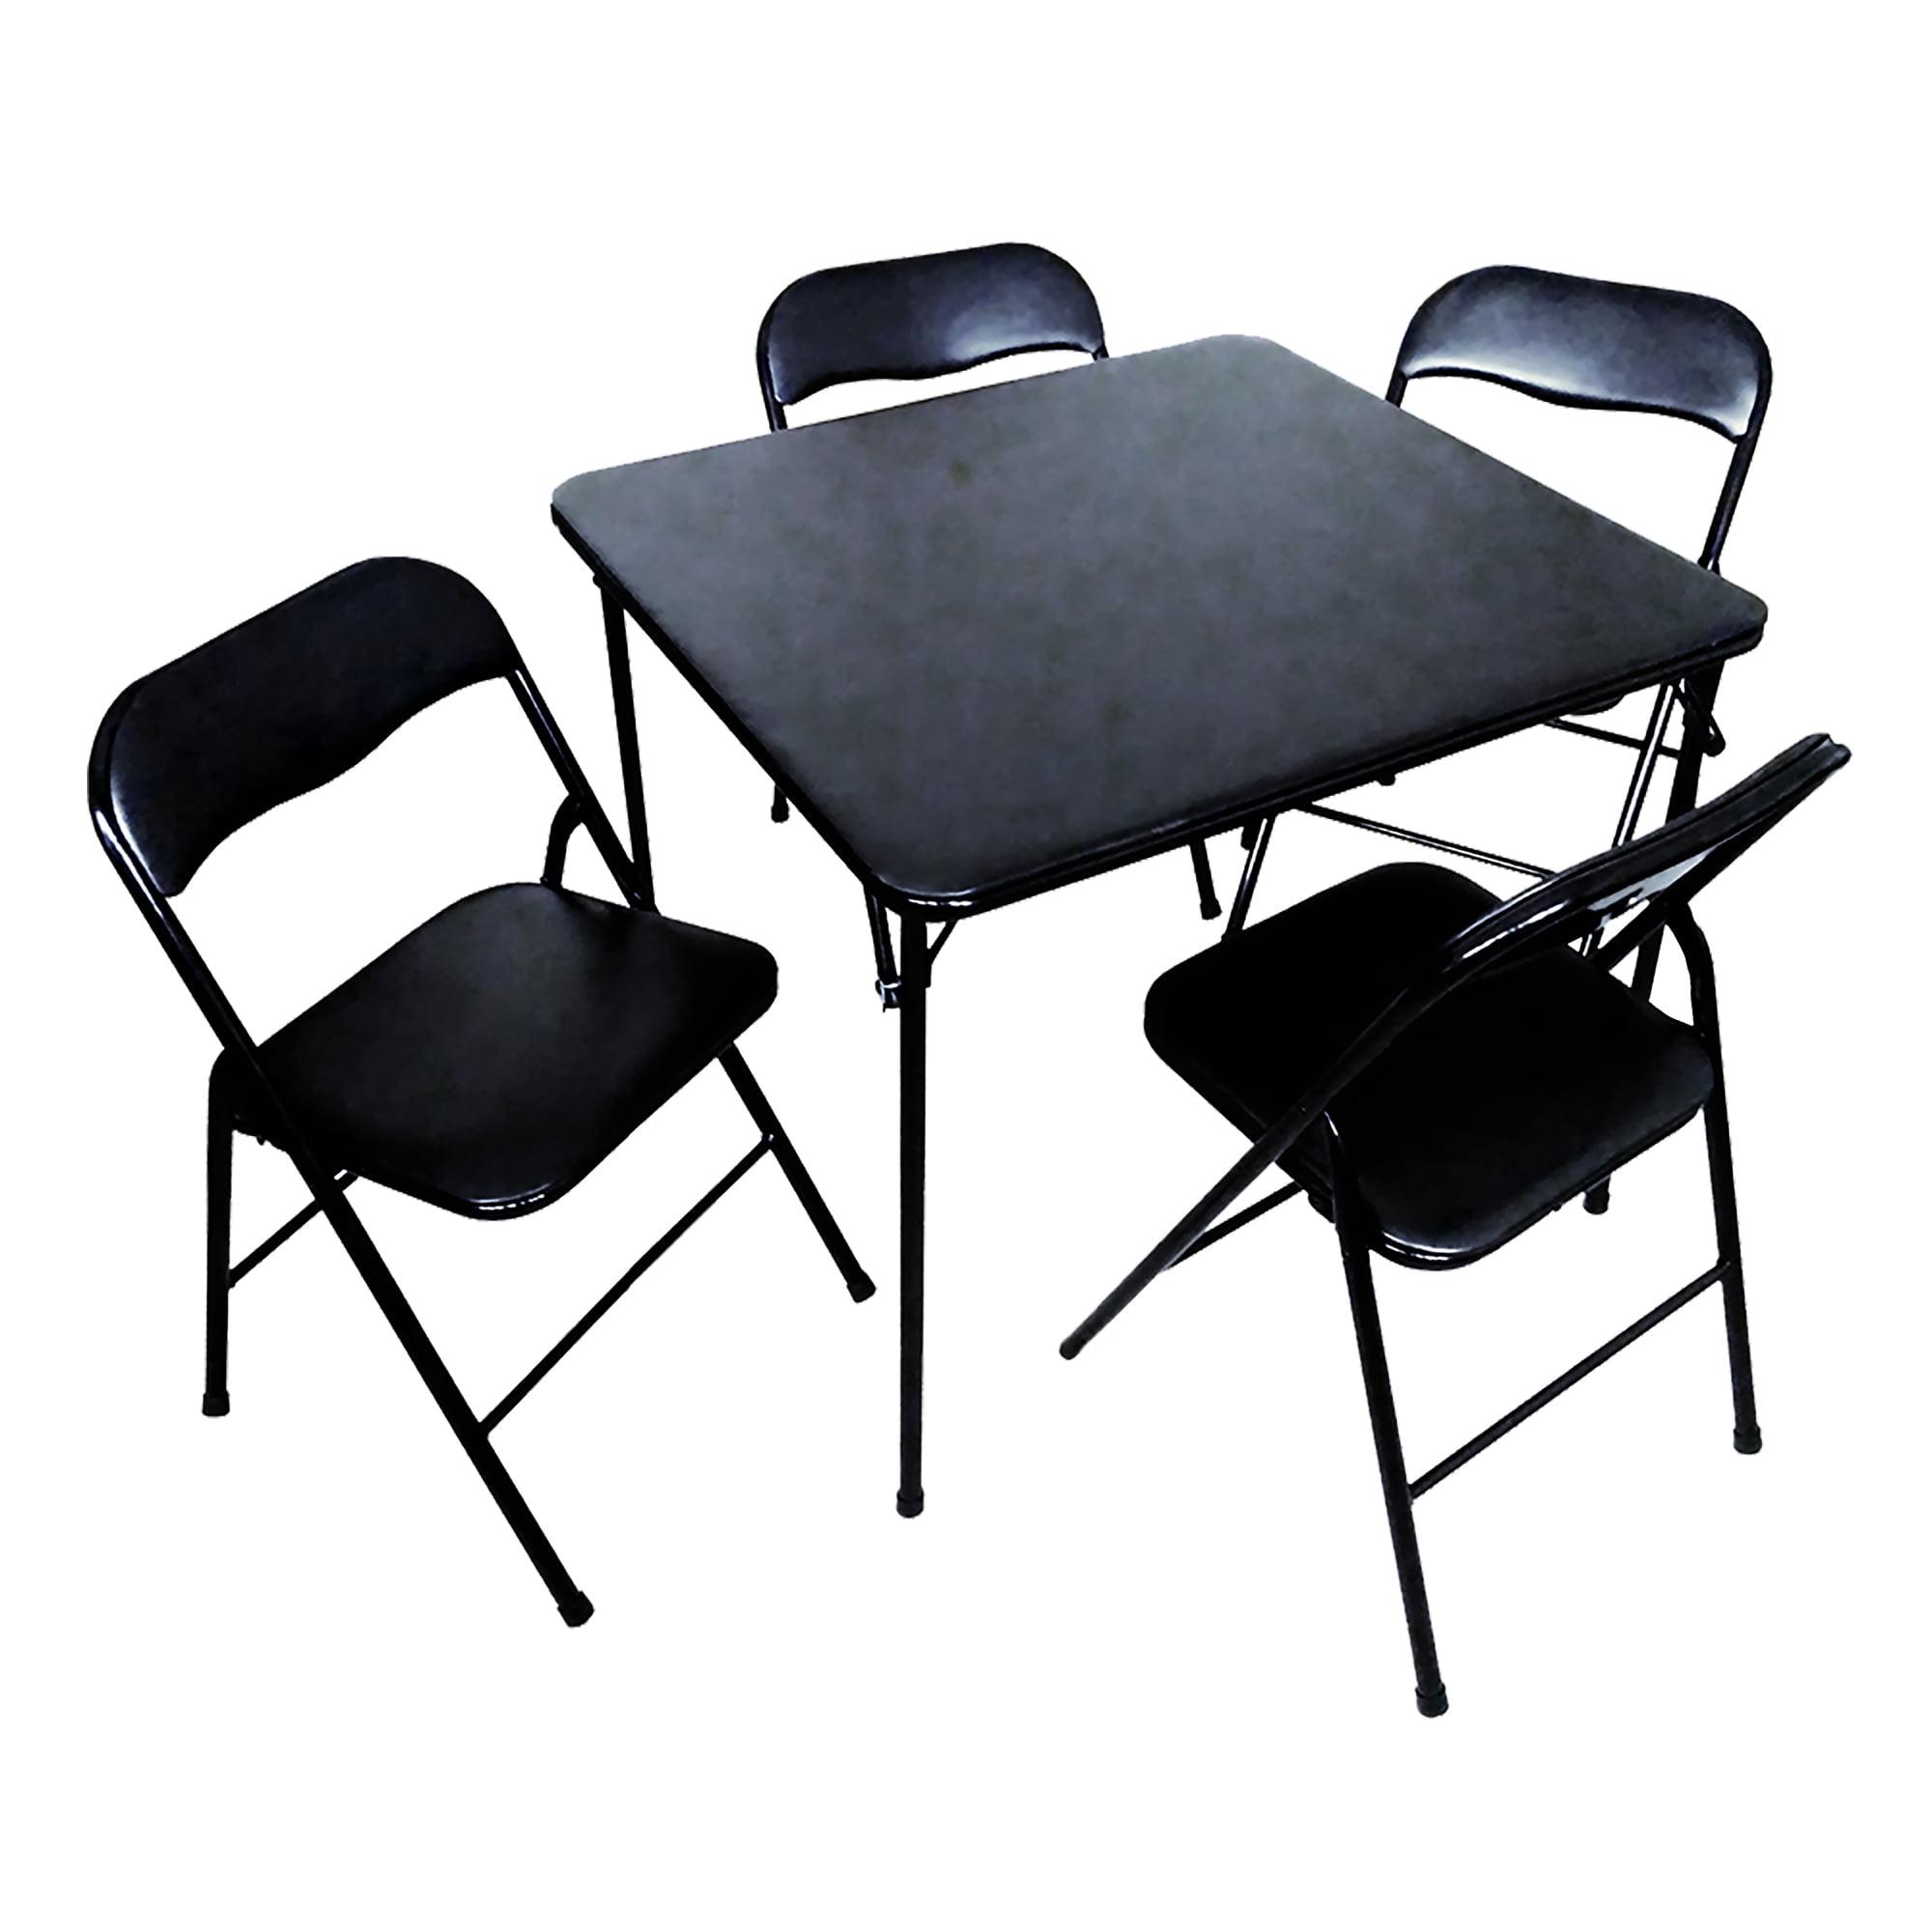 34" Square Black Folding Table & Chair Set with Padded Vinyl Cover